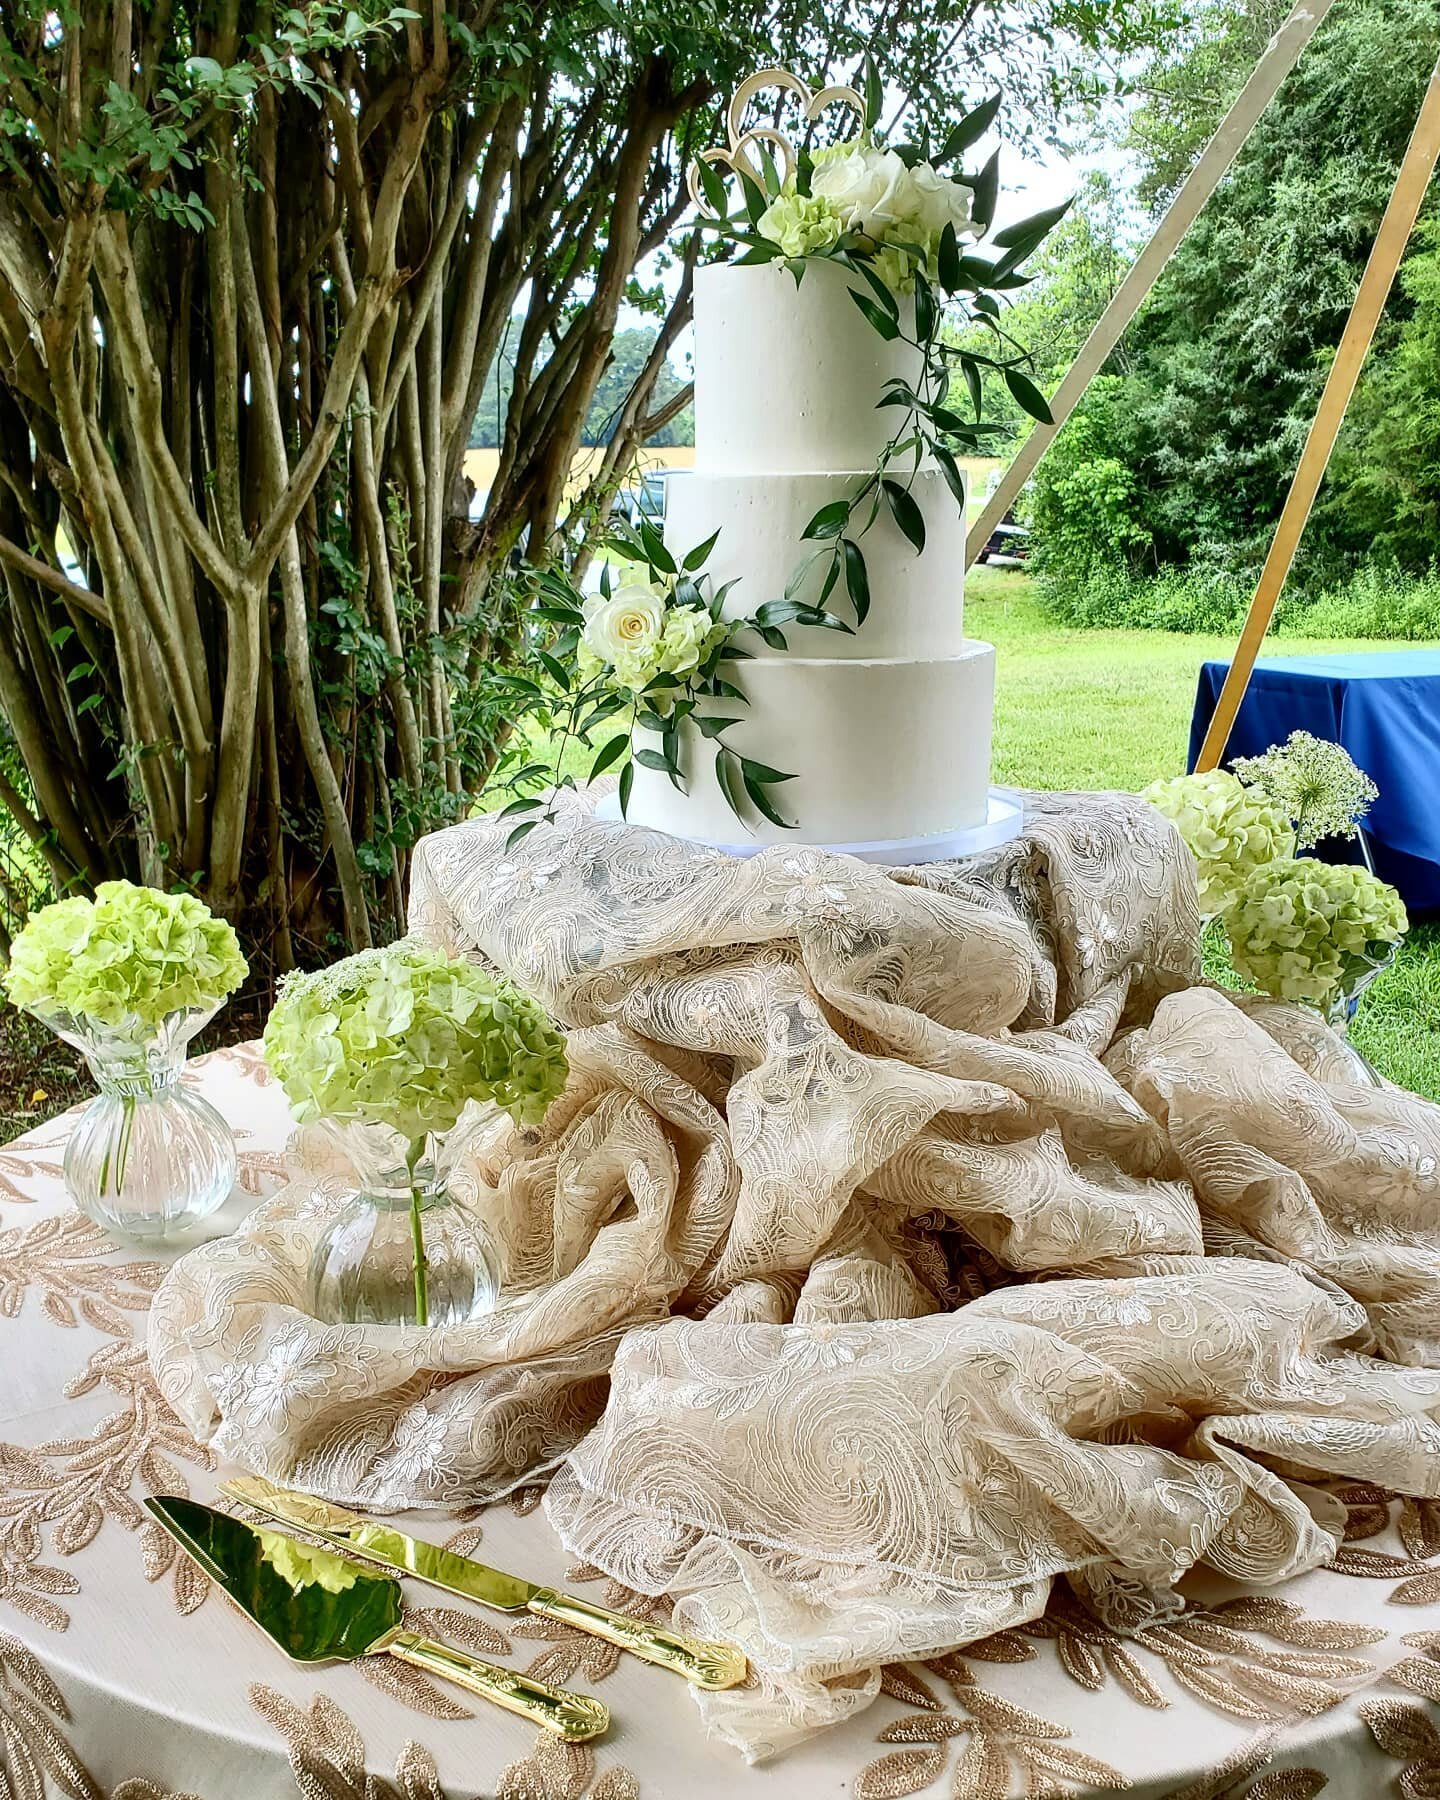 This past weekend we took on the crazy task of 6 wedding cakes in a day. We started off at Cane Creek Farm in Snow Camp, NC. Sometimes, all a cake needs is a beautiful tablescape and some gorgeous florals. #wedding #weddingcake #weddingflorals #green